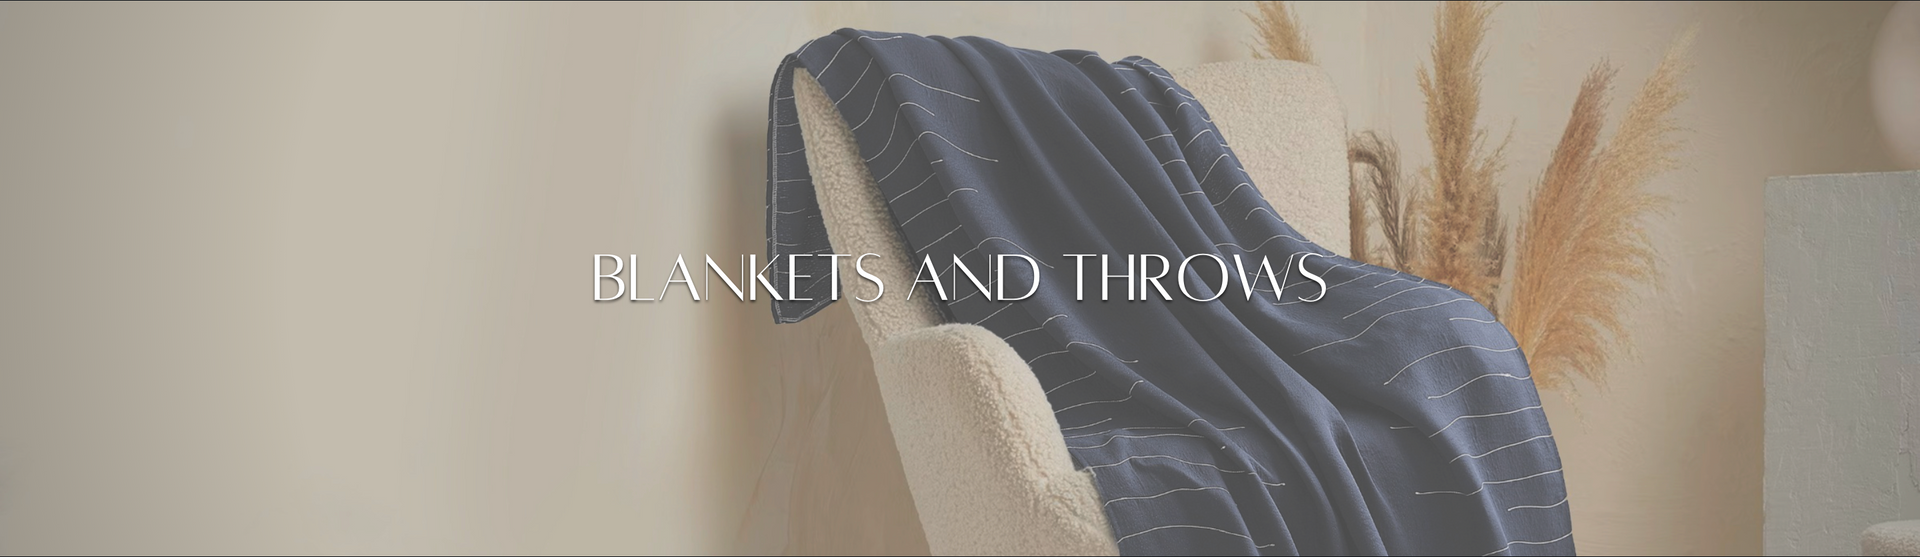 BLANKETS and THROWS